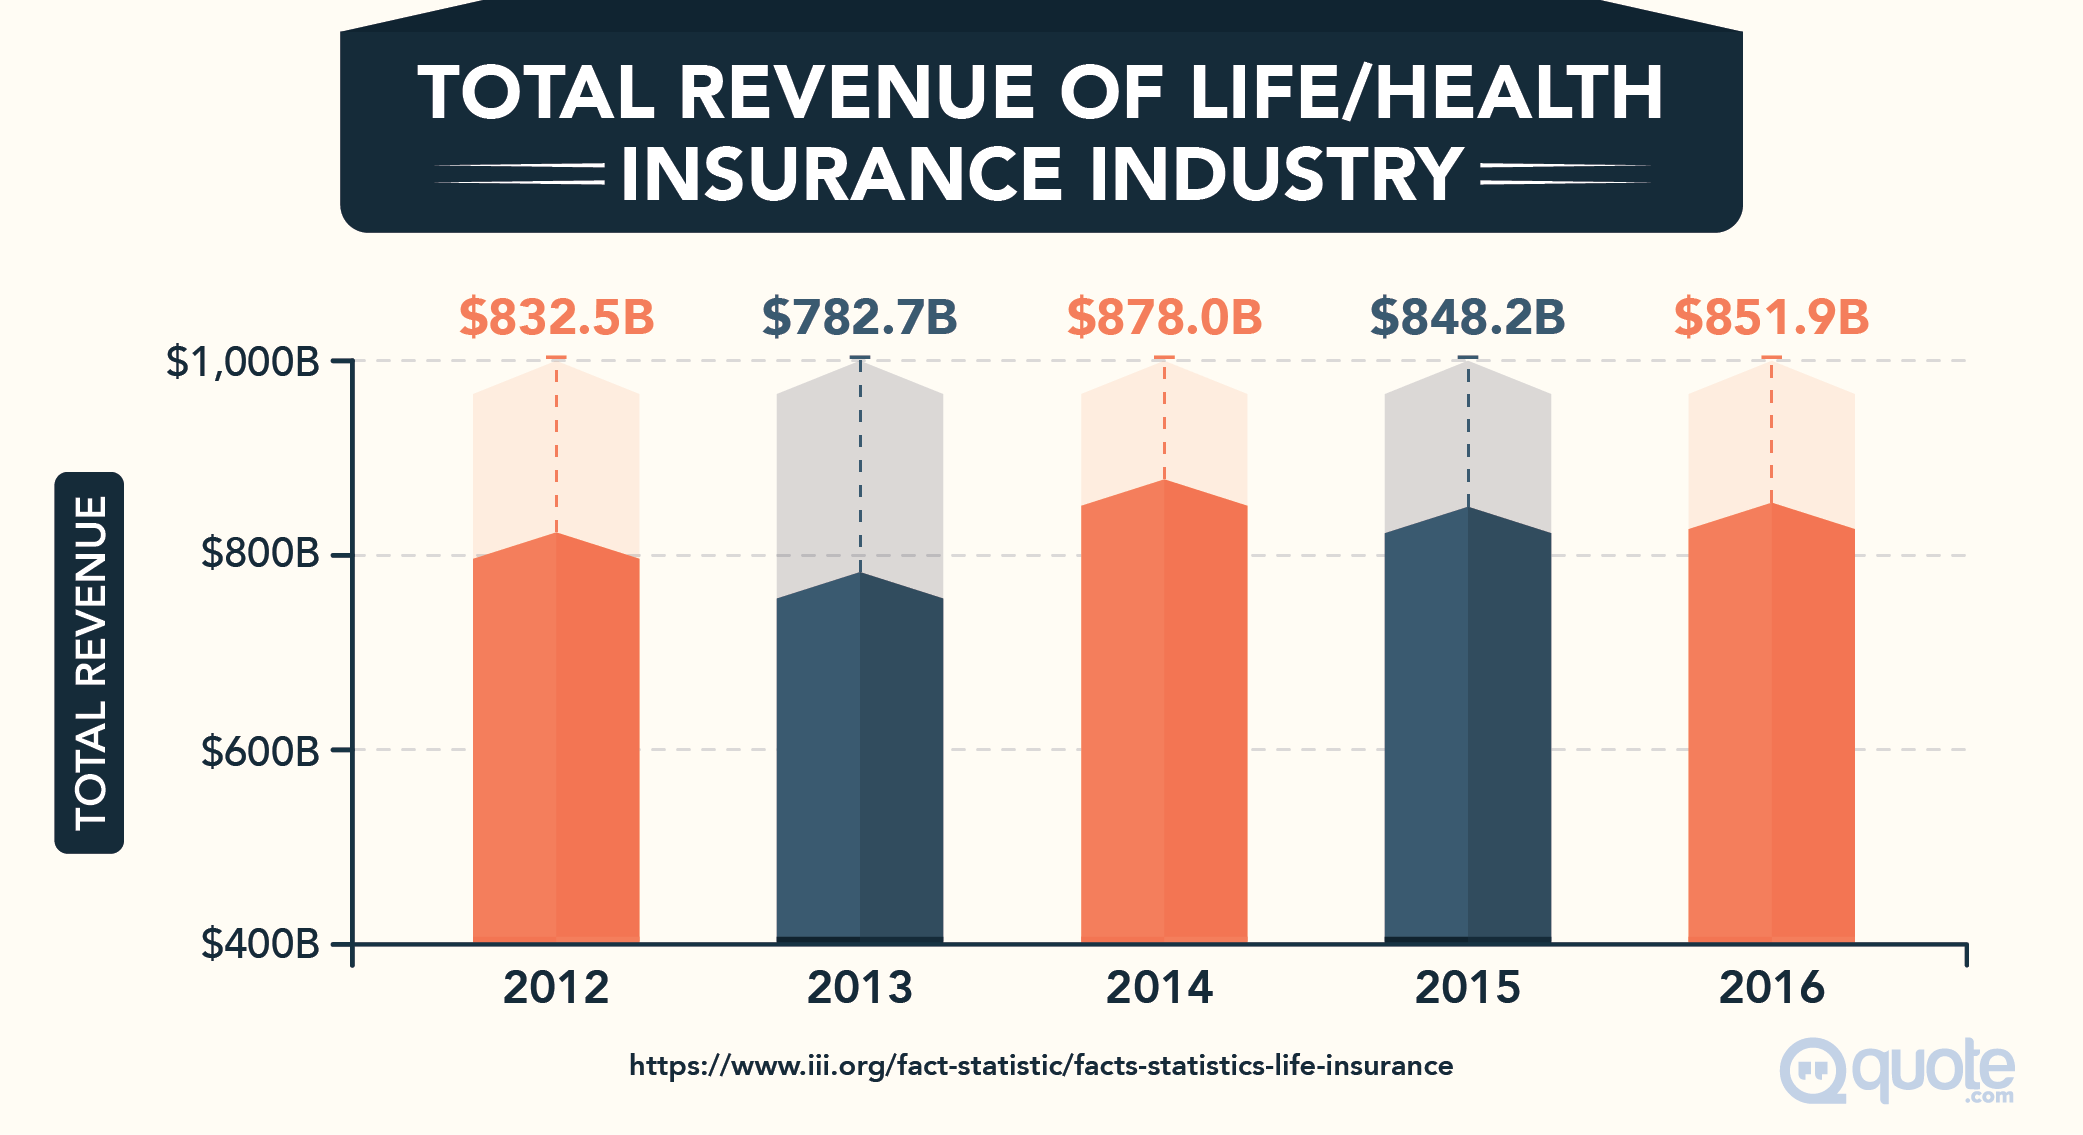 Total Revenue of Life/Health Insurance Industry from 2012-2016